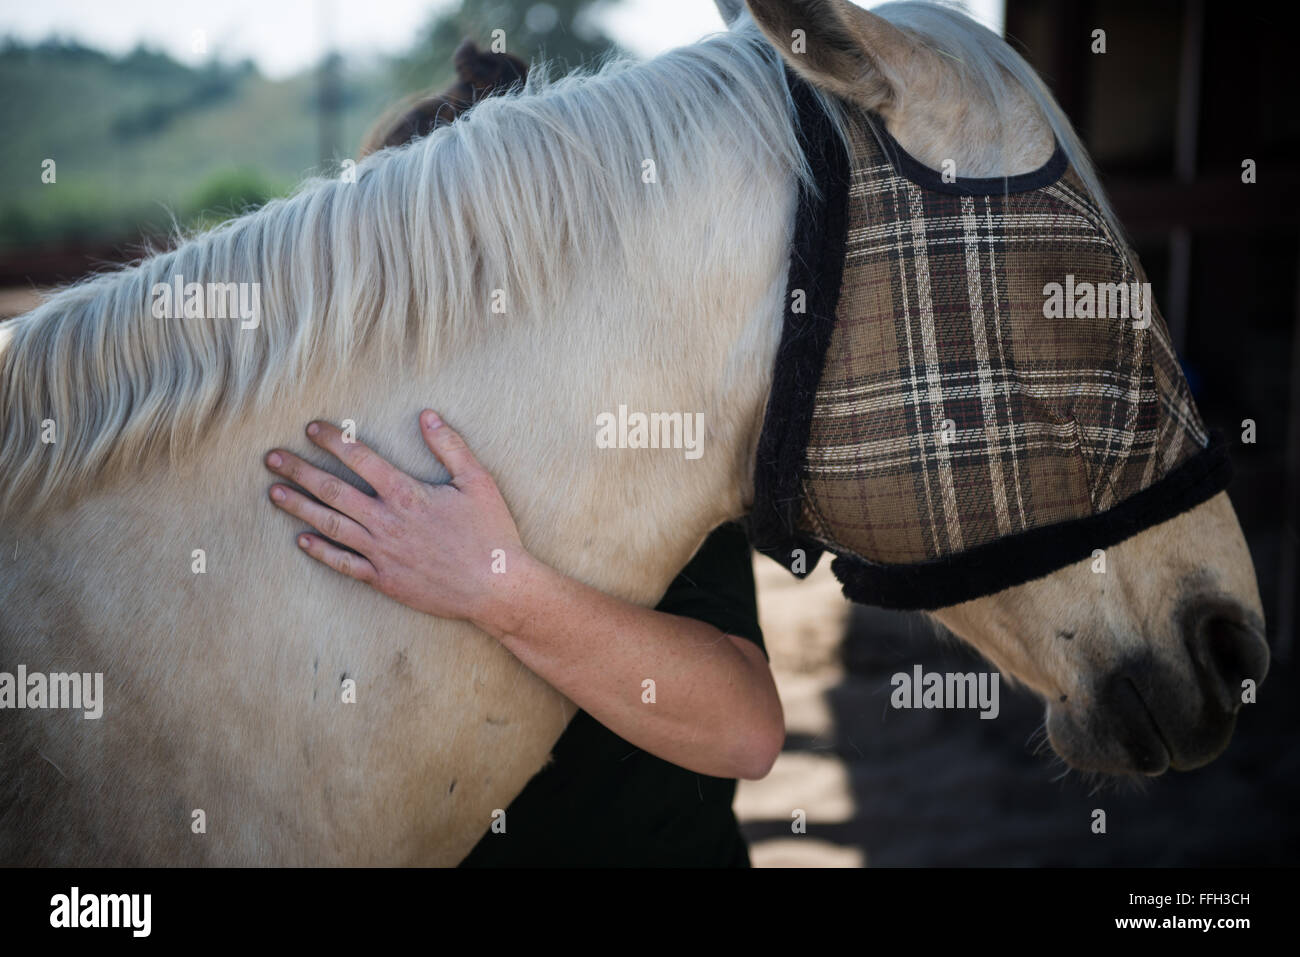 Reserve Staff Sgt. Lauren Daniels wraps her arm around Patton's neck to embrace him before taking him out on a patrol on the installation's beach at Vandenberg Air Force Base, California. Patton, a white palomino, is one of four military horses in Vandenberg AFB's mounted patrol. Stock Photo